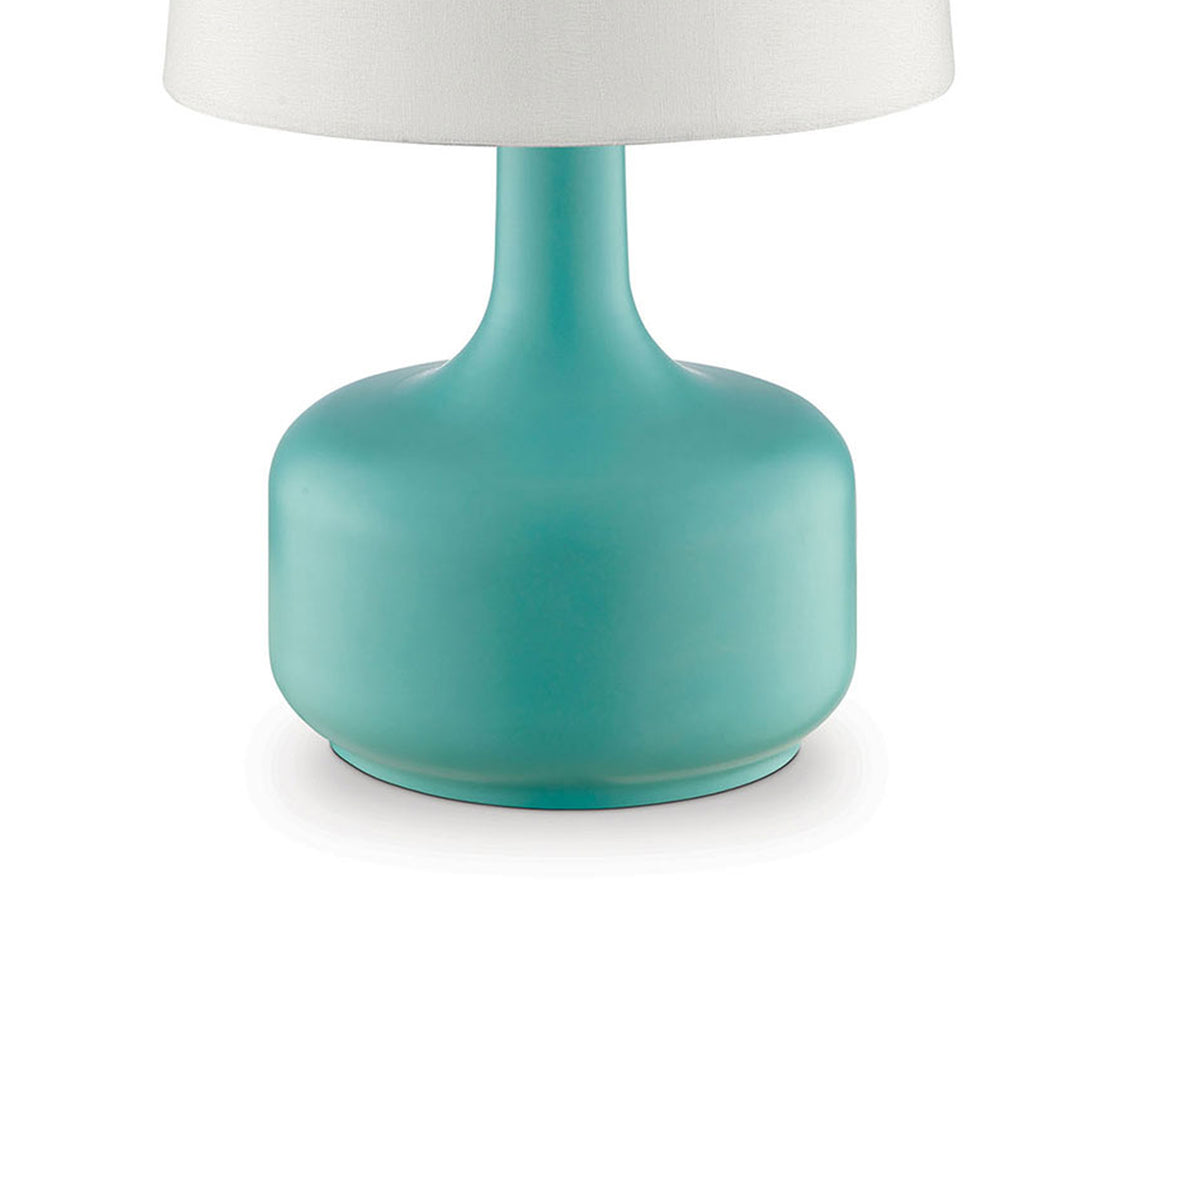 Metal Pot Belly Base Table Lamp with 3 Way Touch Light in White and Sky Blue - BM209051